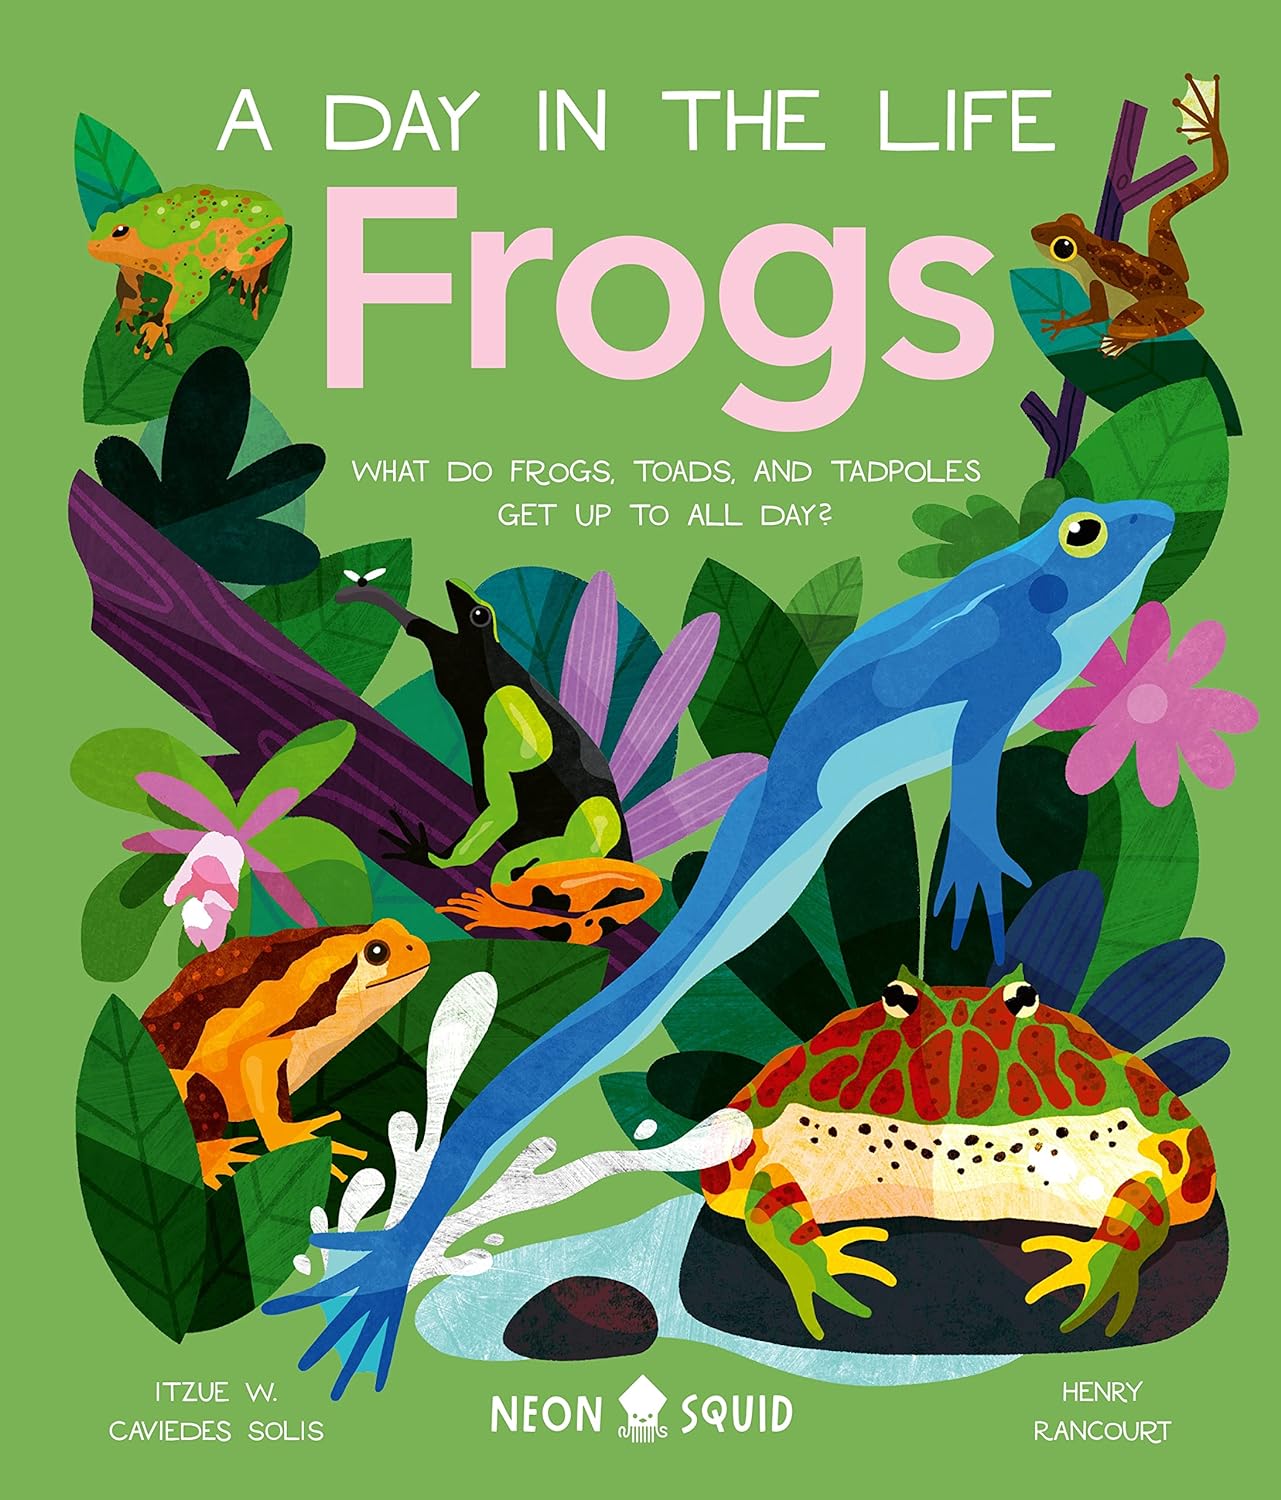 Image of "A Day in the Life: Frogs"